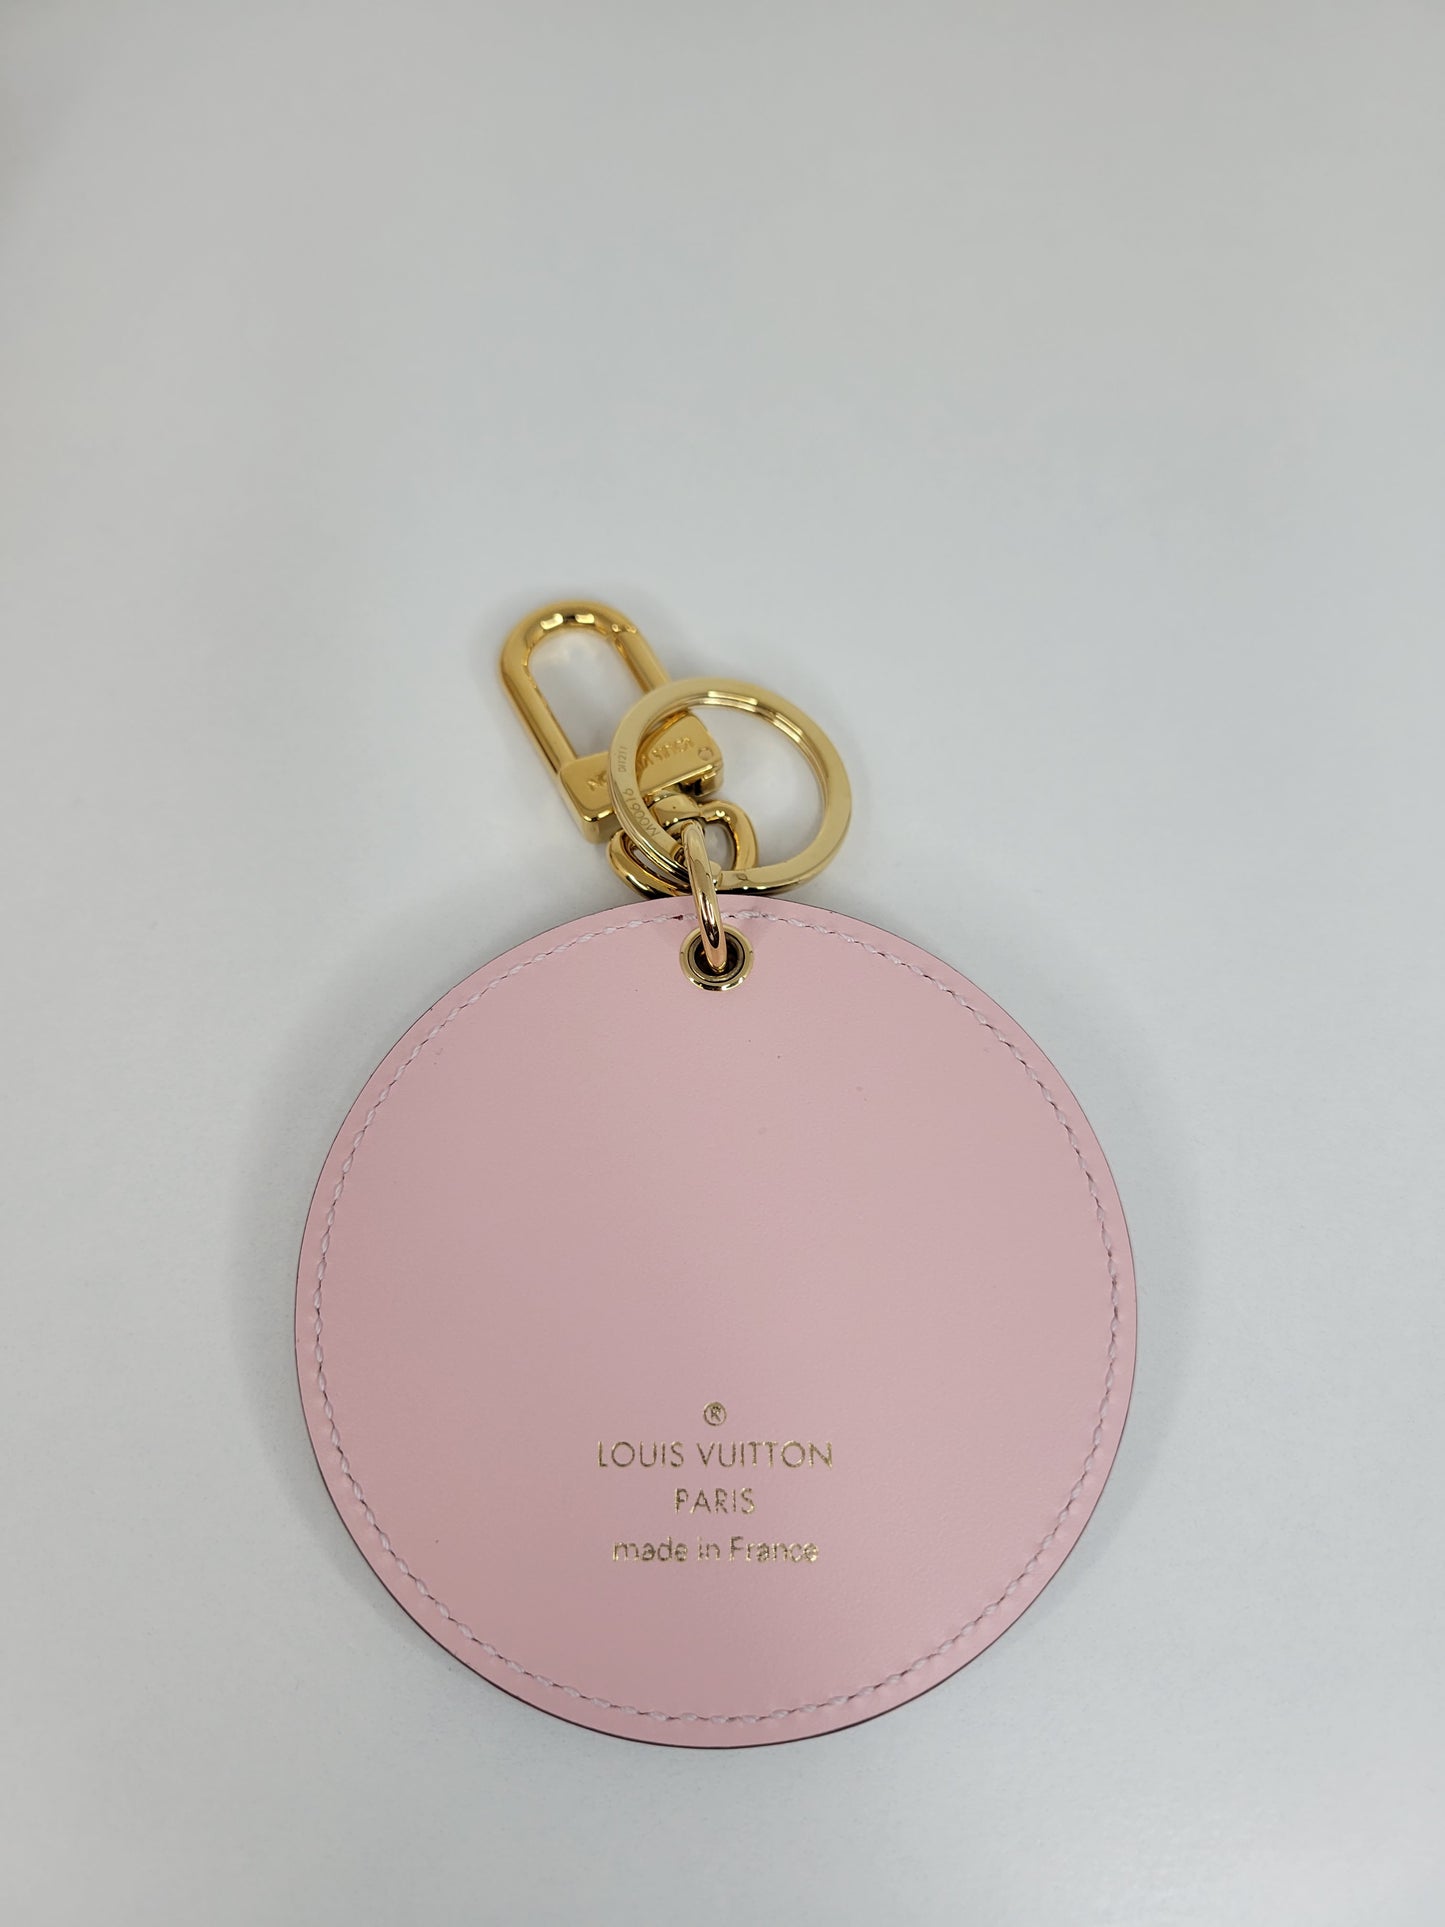 Louis Vuitton Limited Edition Valentines Day logo pink bag charm key holder